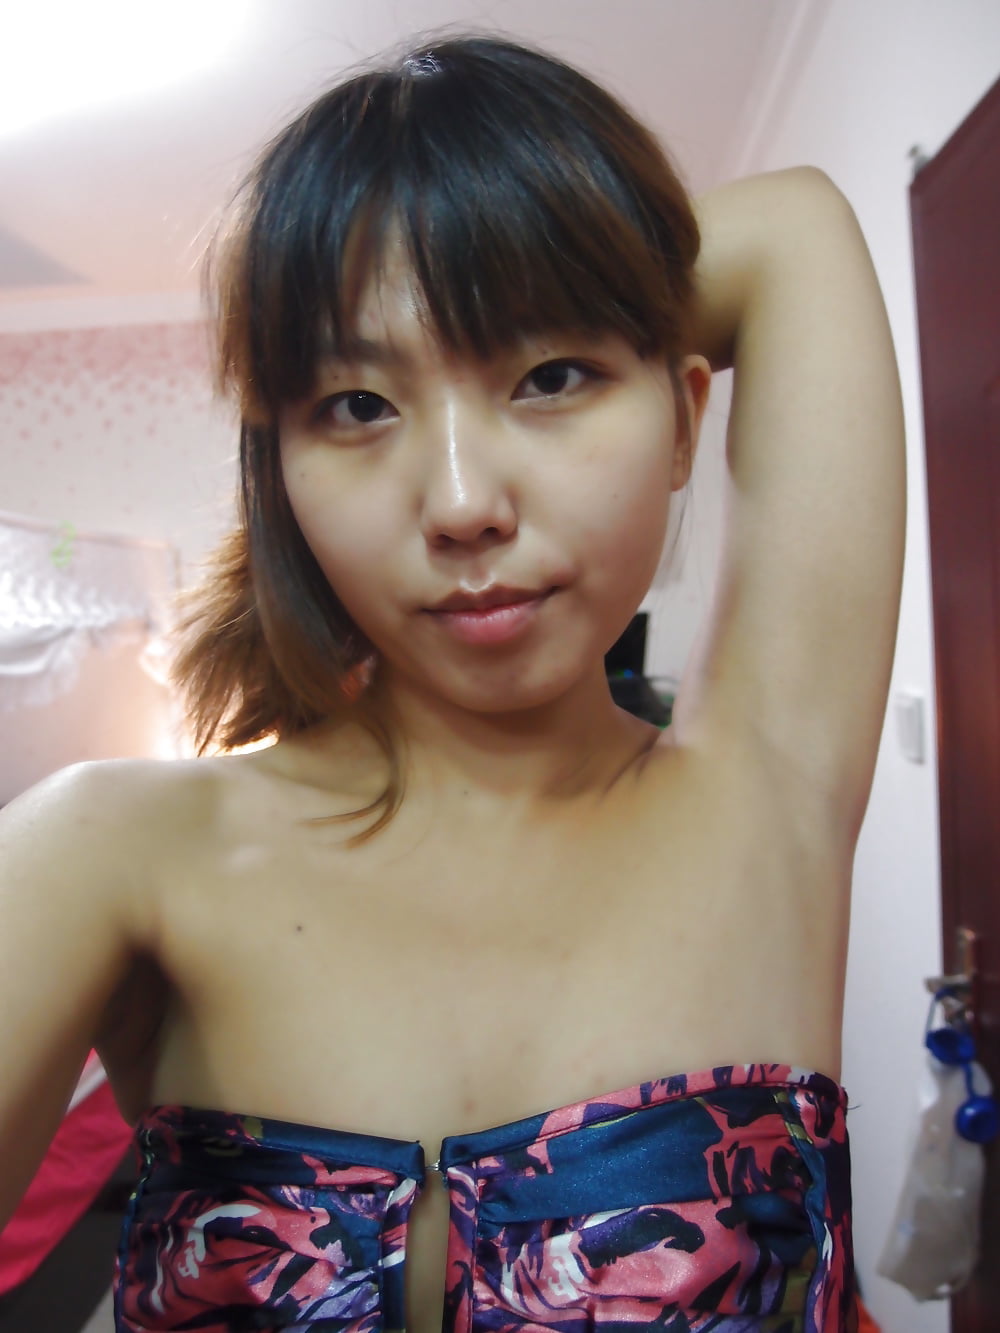 XXX Chinese Amateur Girl17